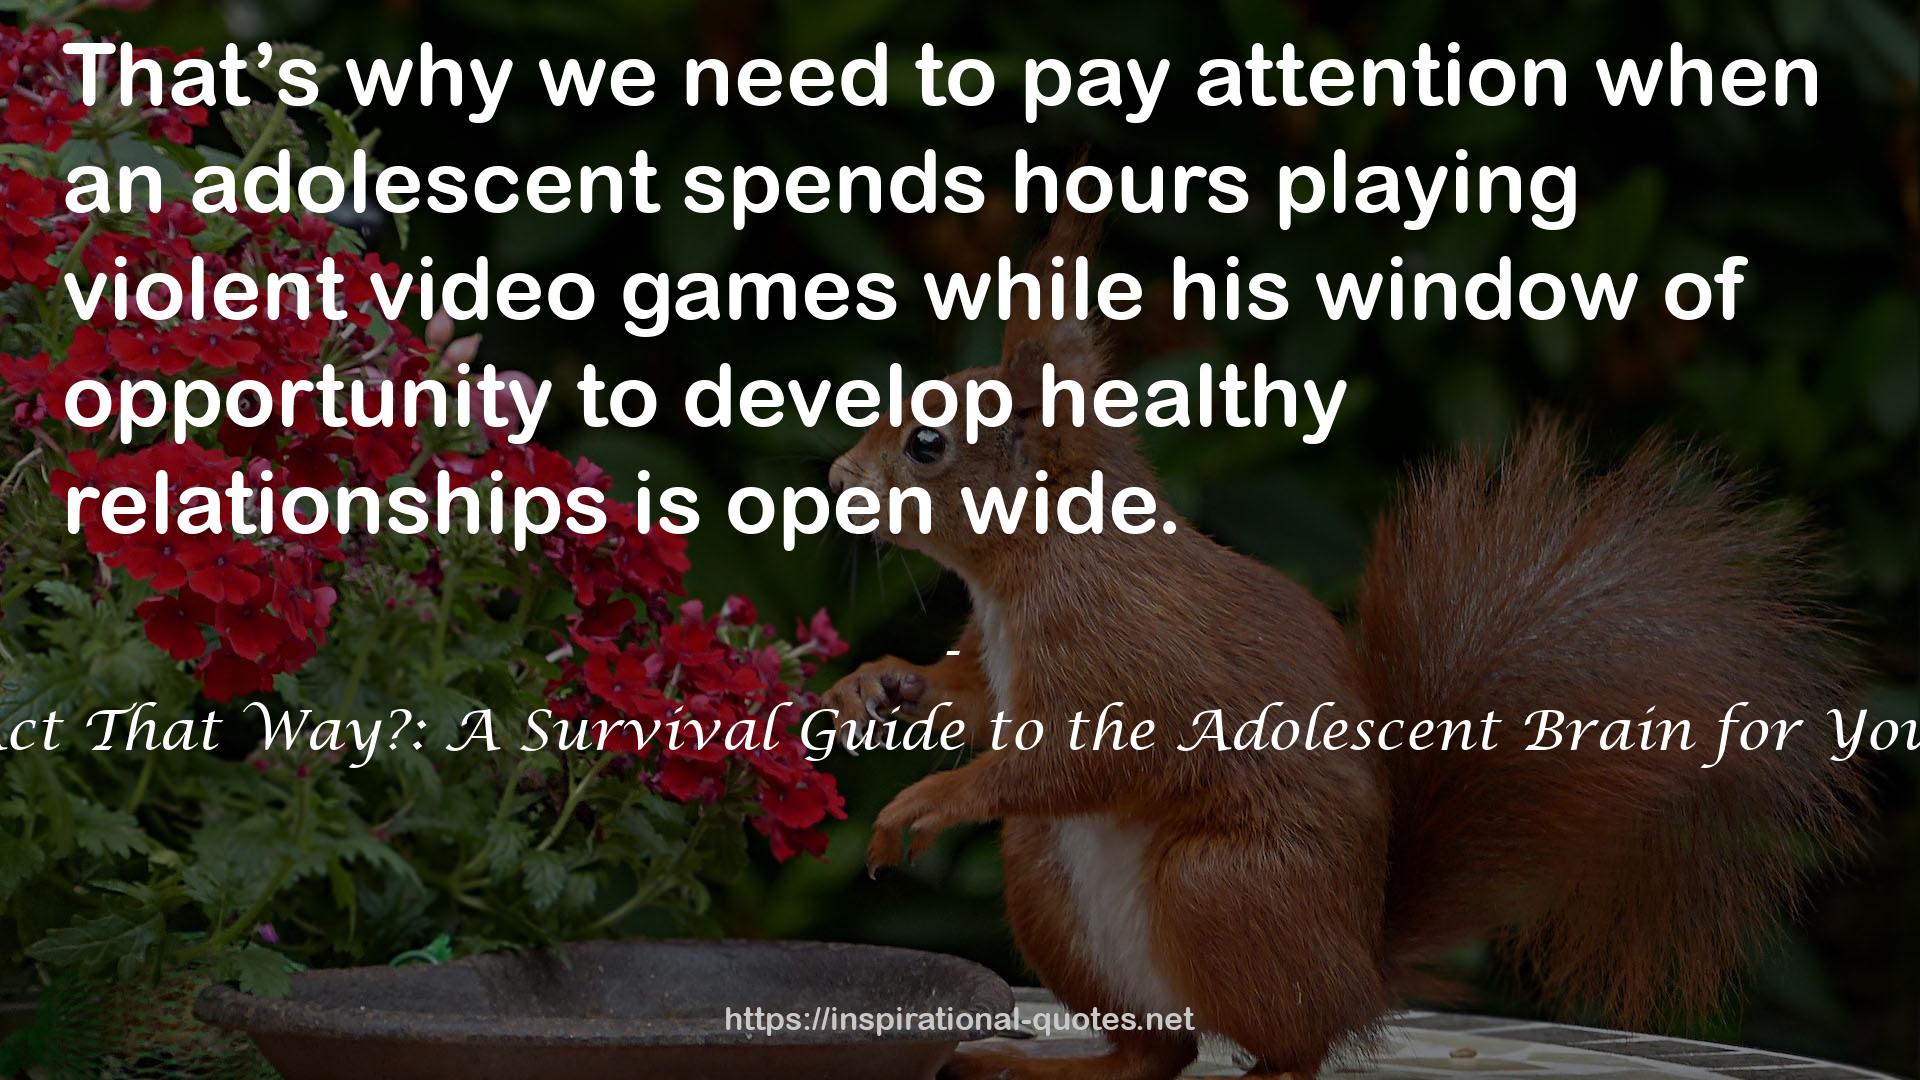 Why Do They Act That Way?: A Survival Guide to the Adolescent Brain for You and Your Teen QUOTES